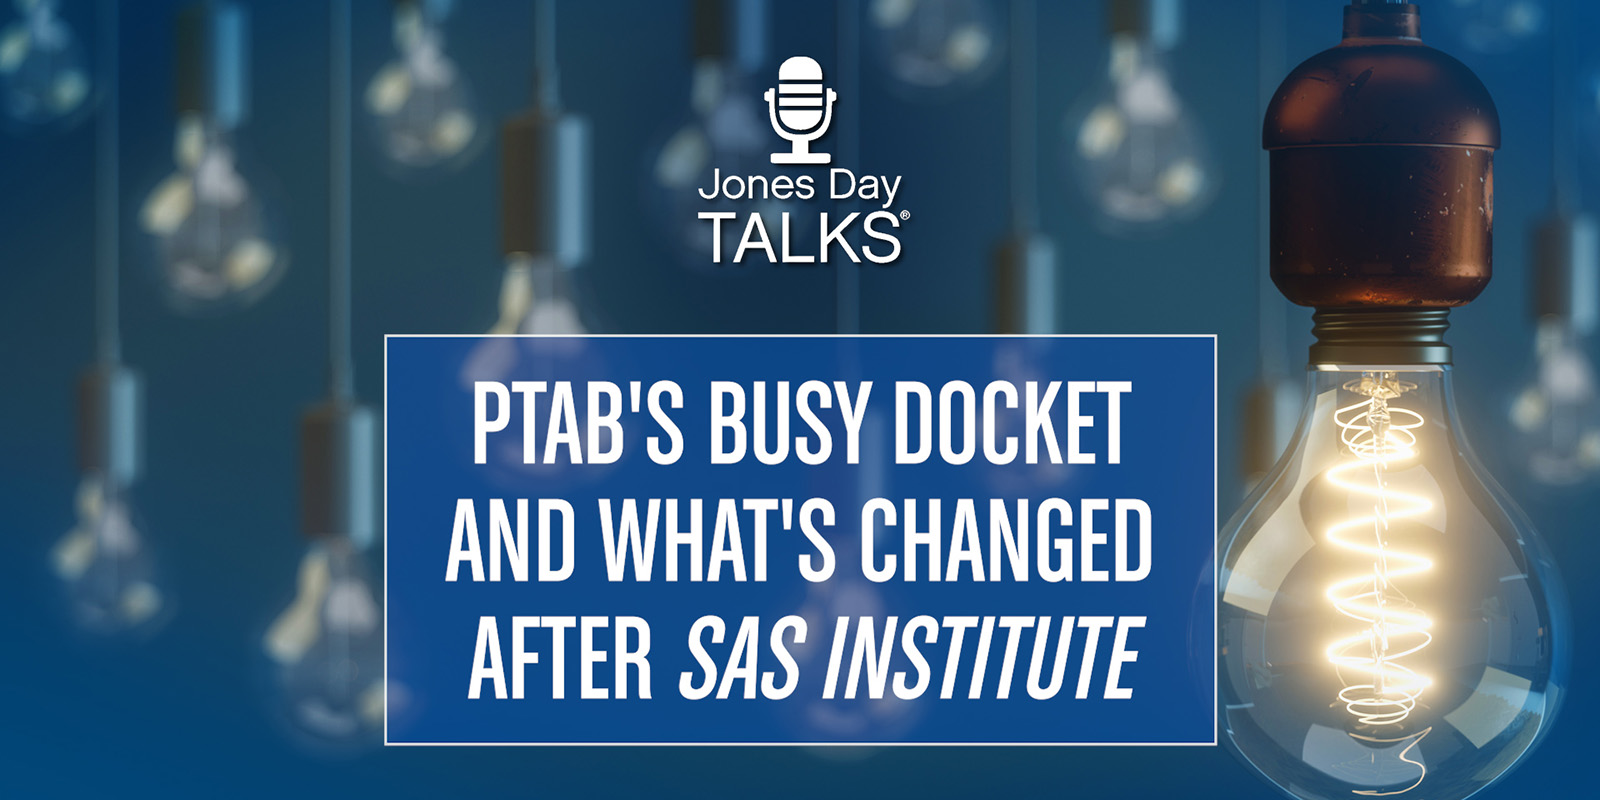 PTAB’s Busy Docket and What’s Changed After SAS Institute